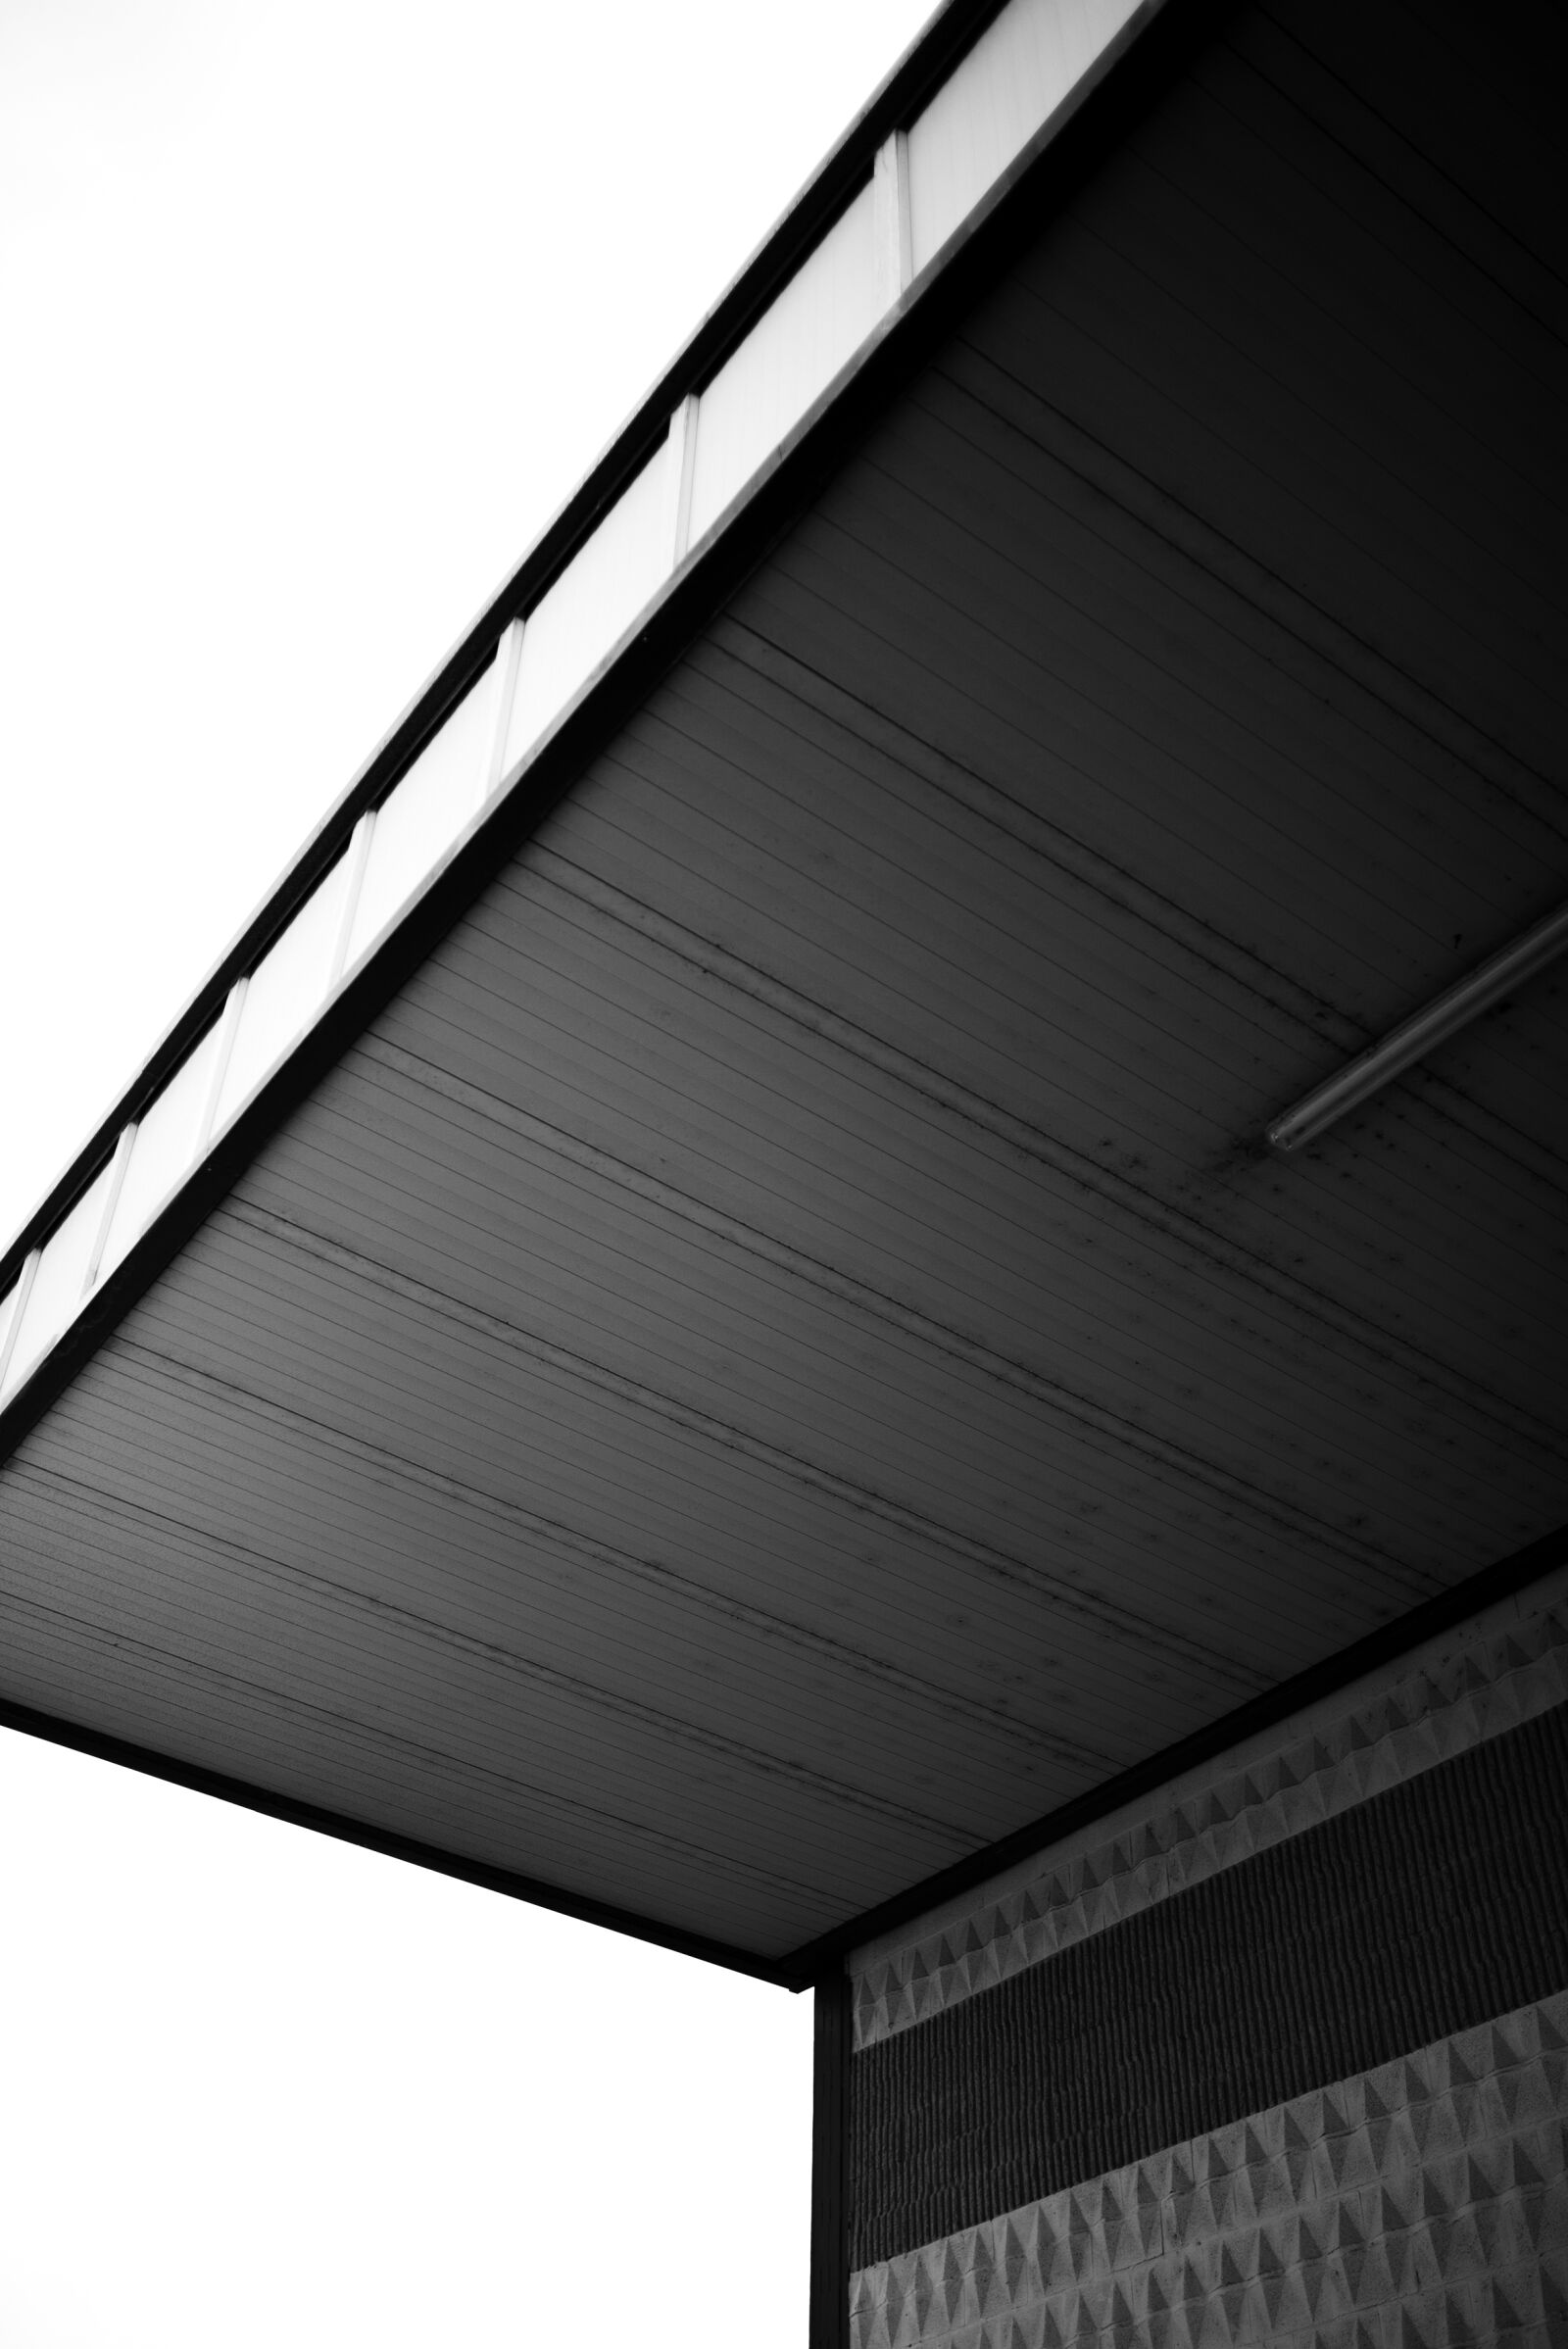 Sigma 35mm F1.4 DG HSM Art sample photo. Architecture, black, and, white photography